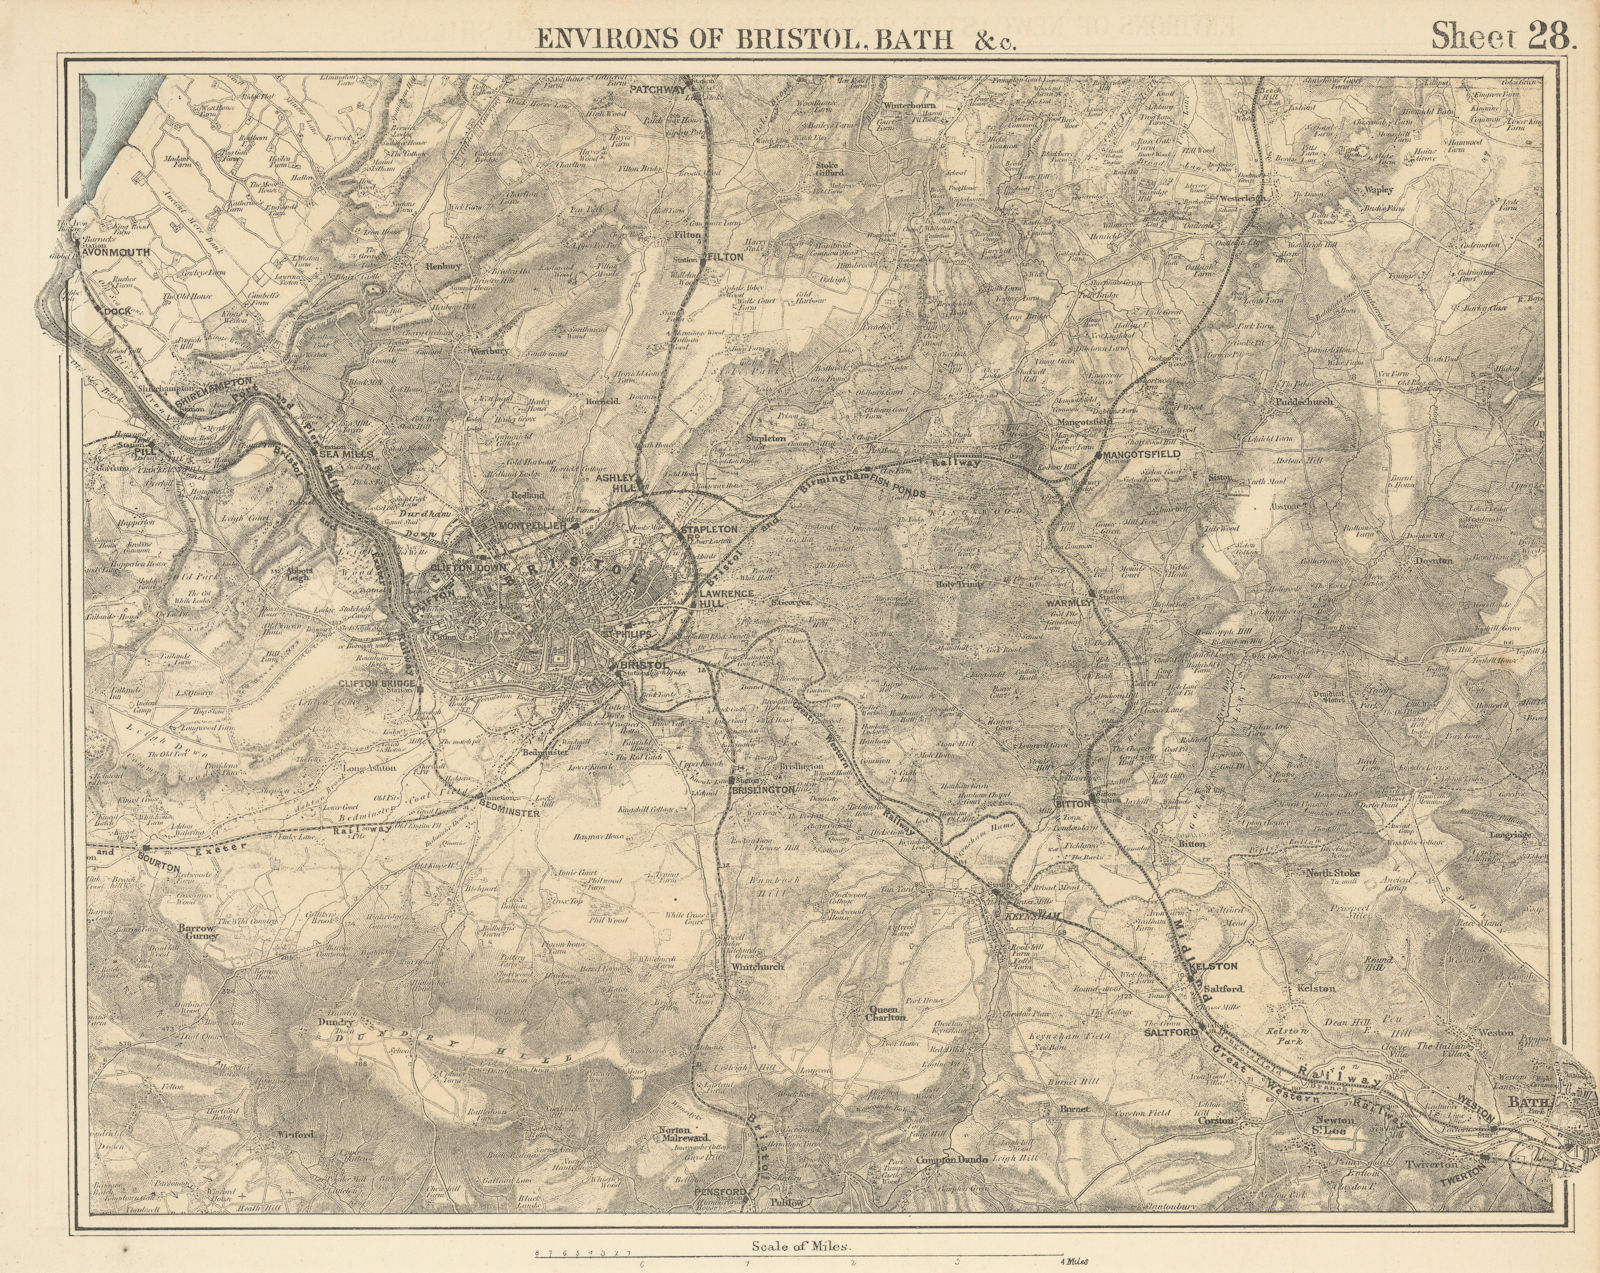 Associate Product BRISTOL, BATH & environs. South Cotswolds. North Mendips by GW BACON 1883 map